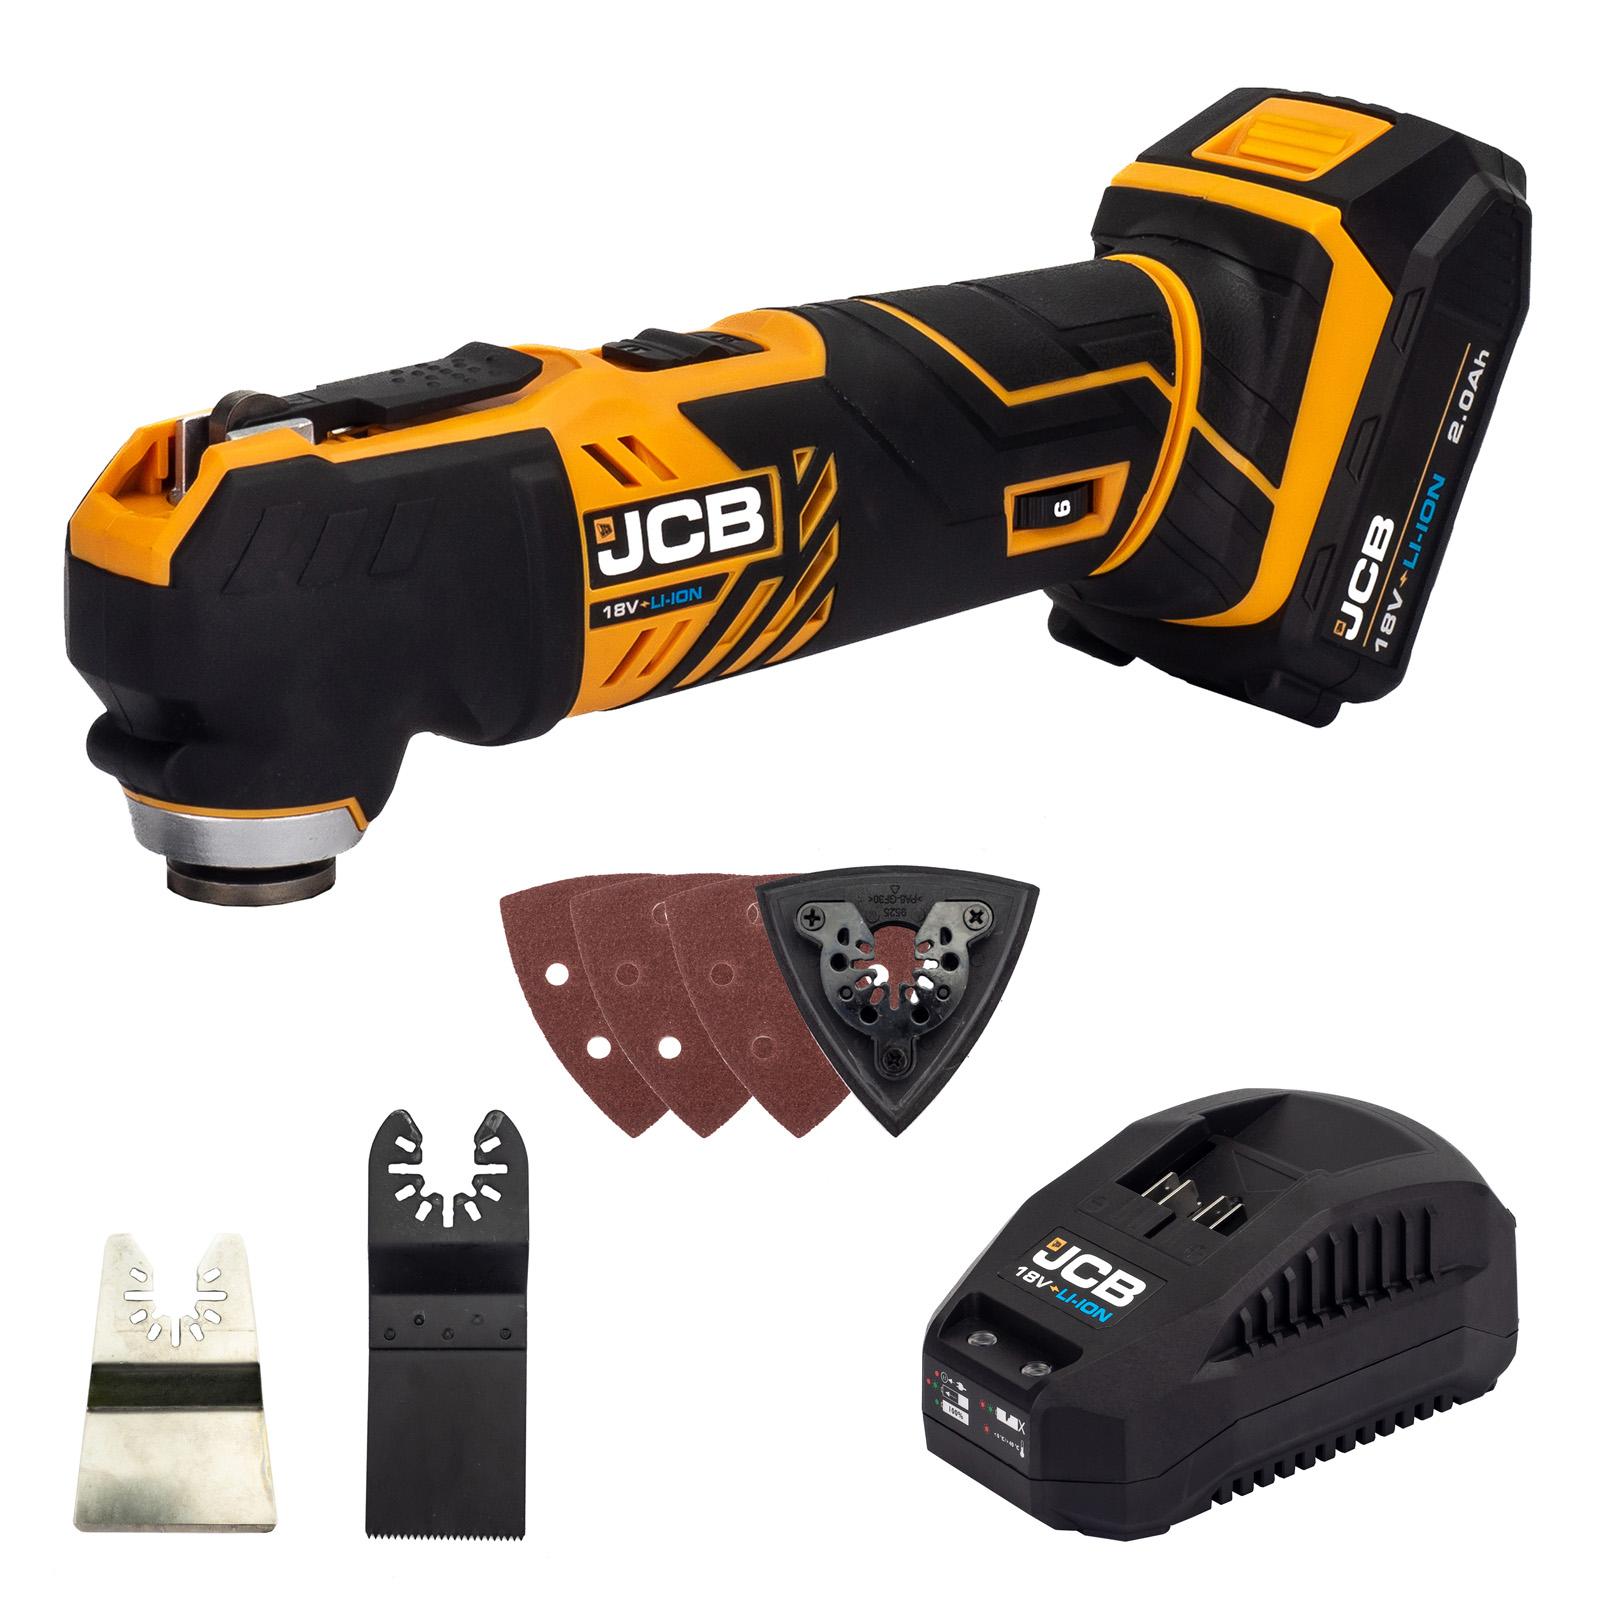 JCB 18V Cordless Multi-Tool with 2.0ah battery and 2.4A charger Shop  Online